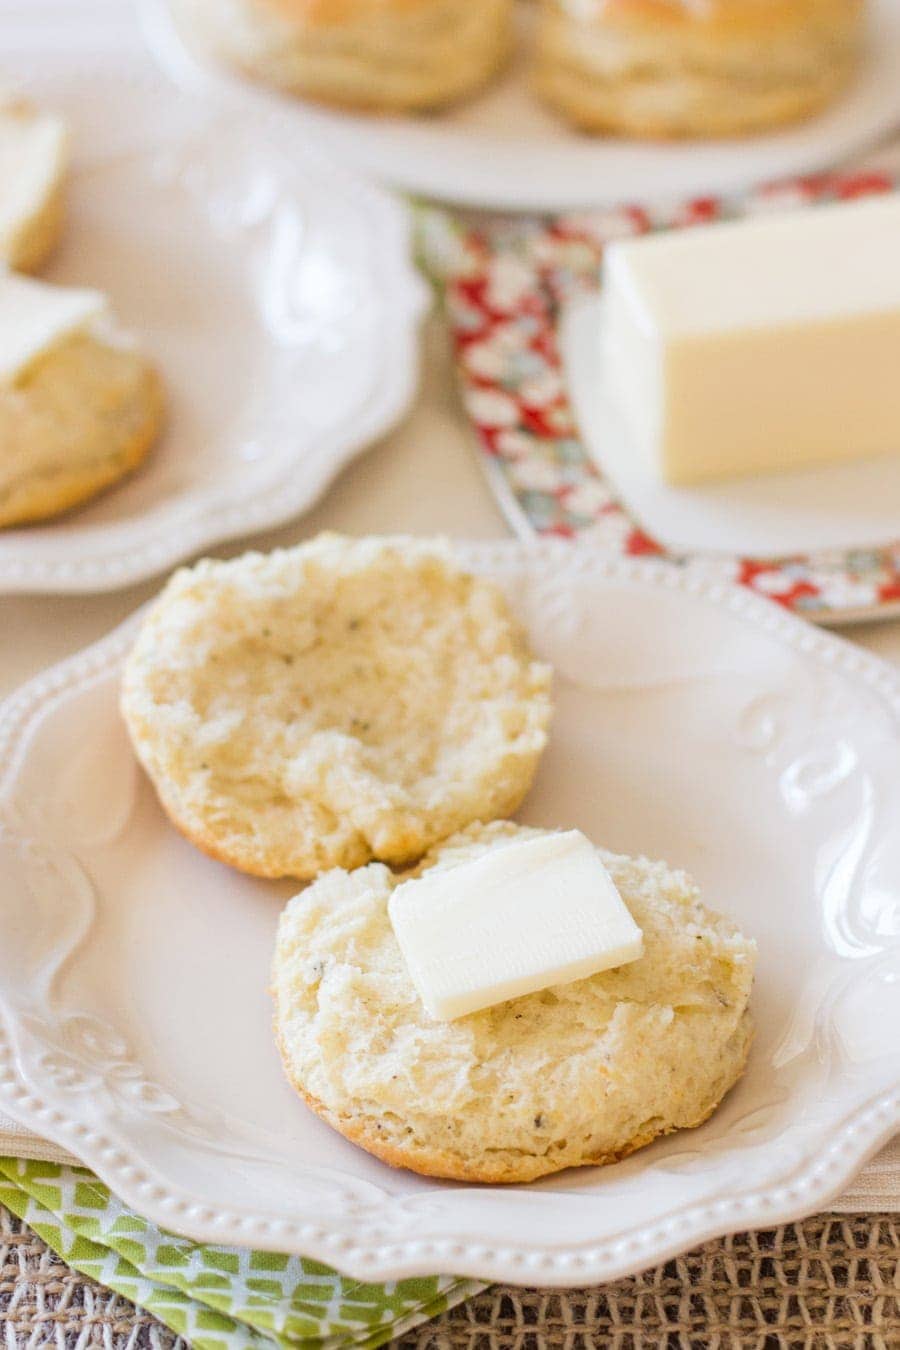 Black Pepper Biscuits. Freshly ground black pepper makes all the difference in these sky-high biscuits. Make some today!